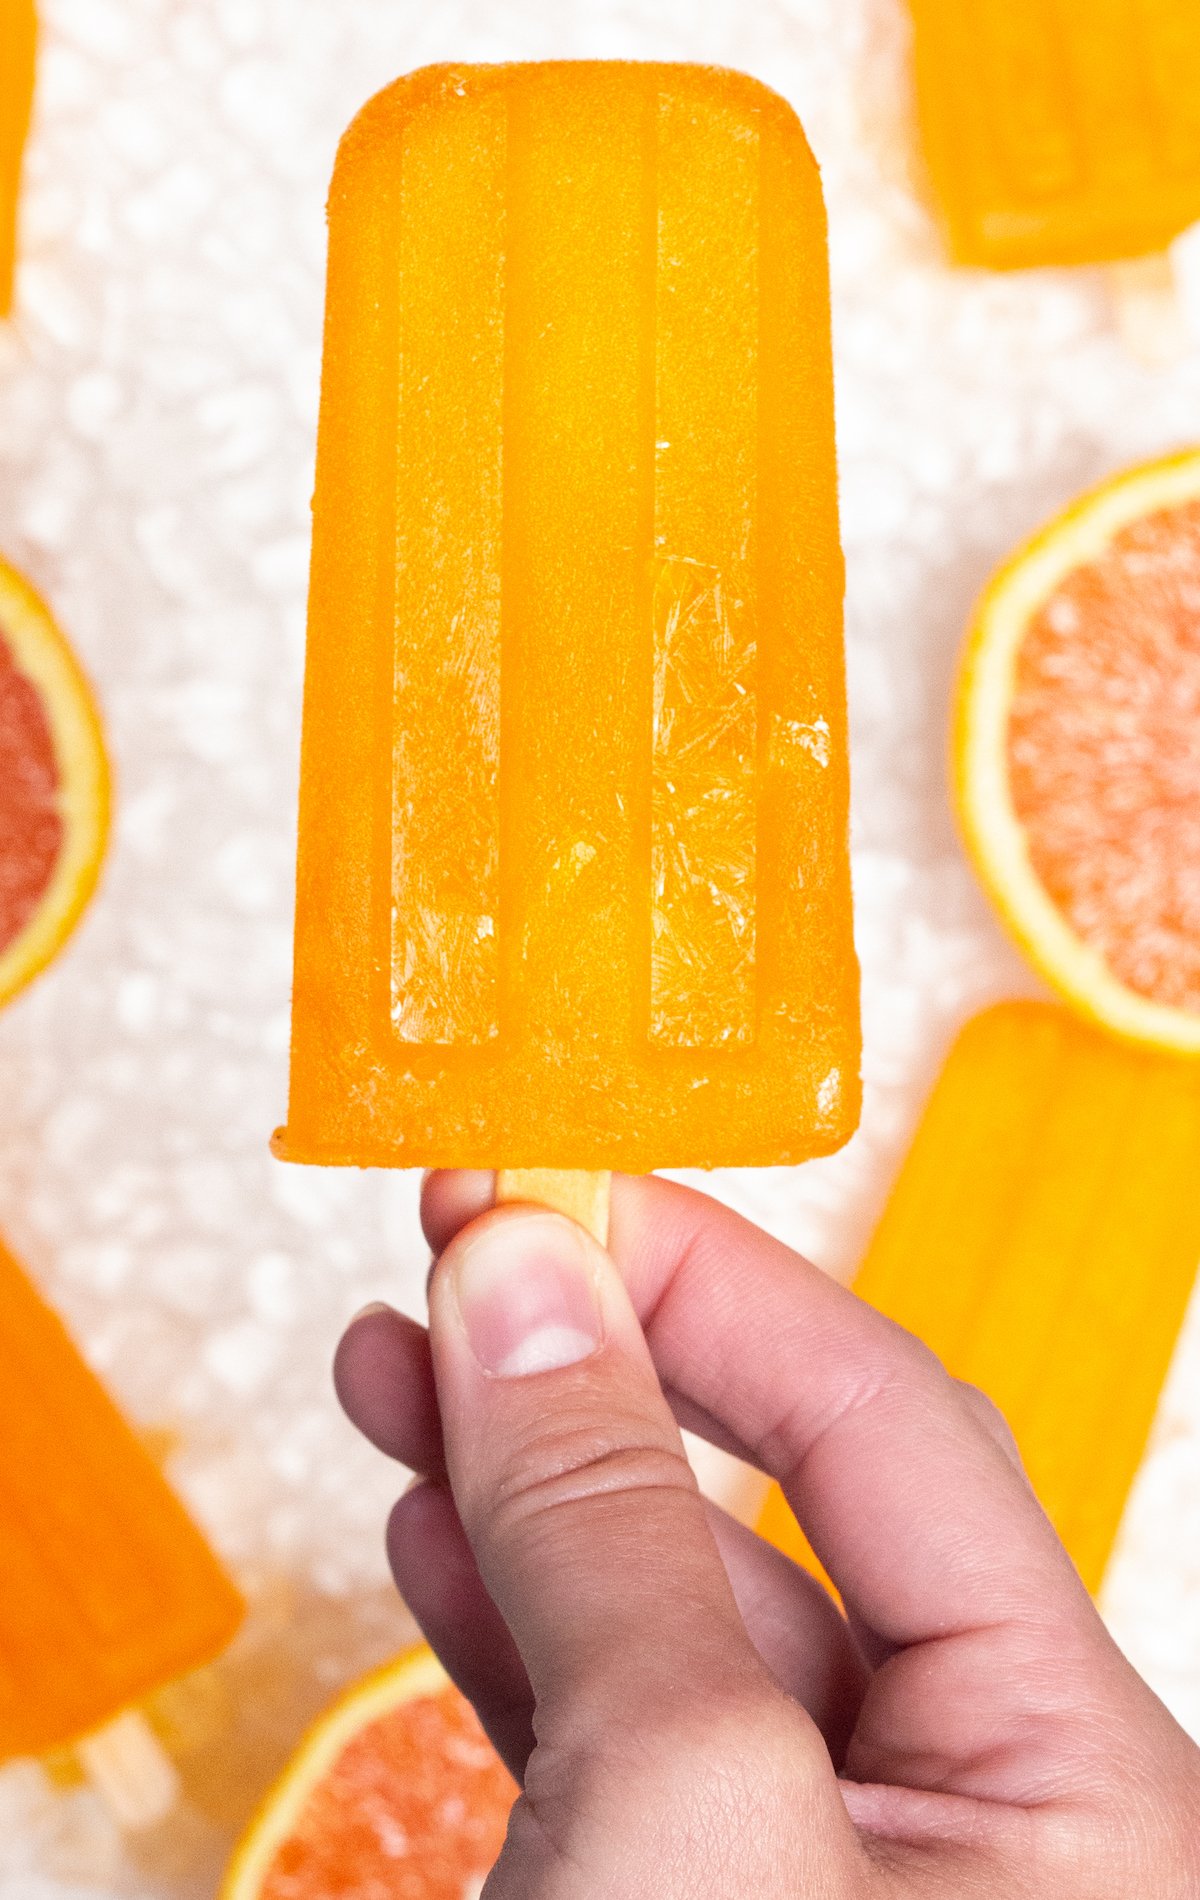 A hand holds up an Orange Popsicle in front of a white background. A few other orange popsicles are in the background out of focus.